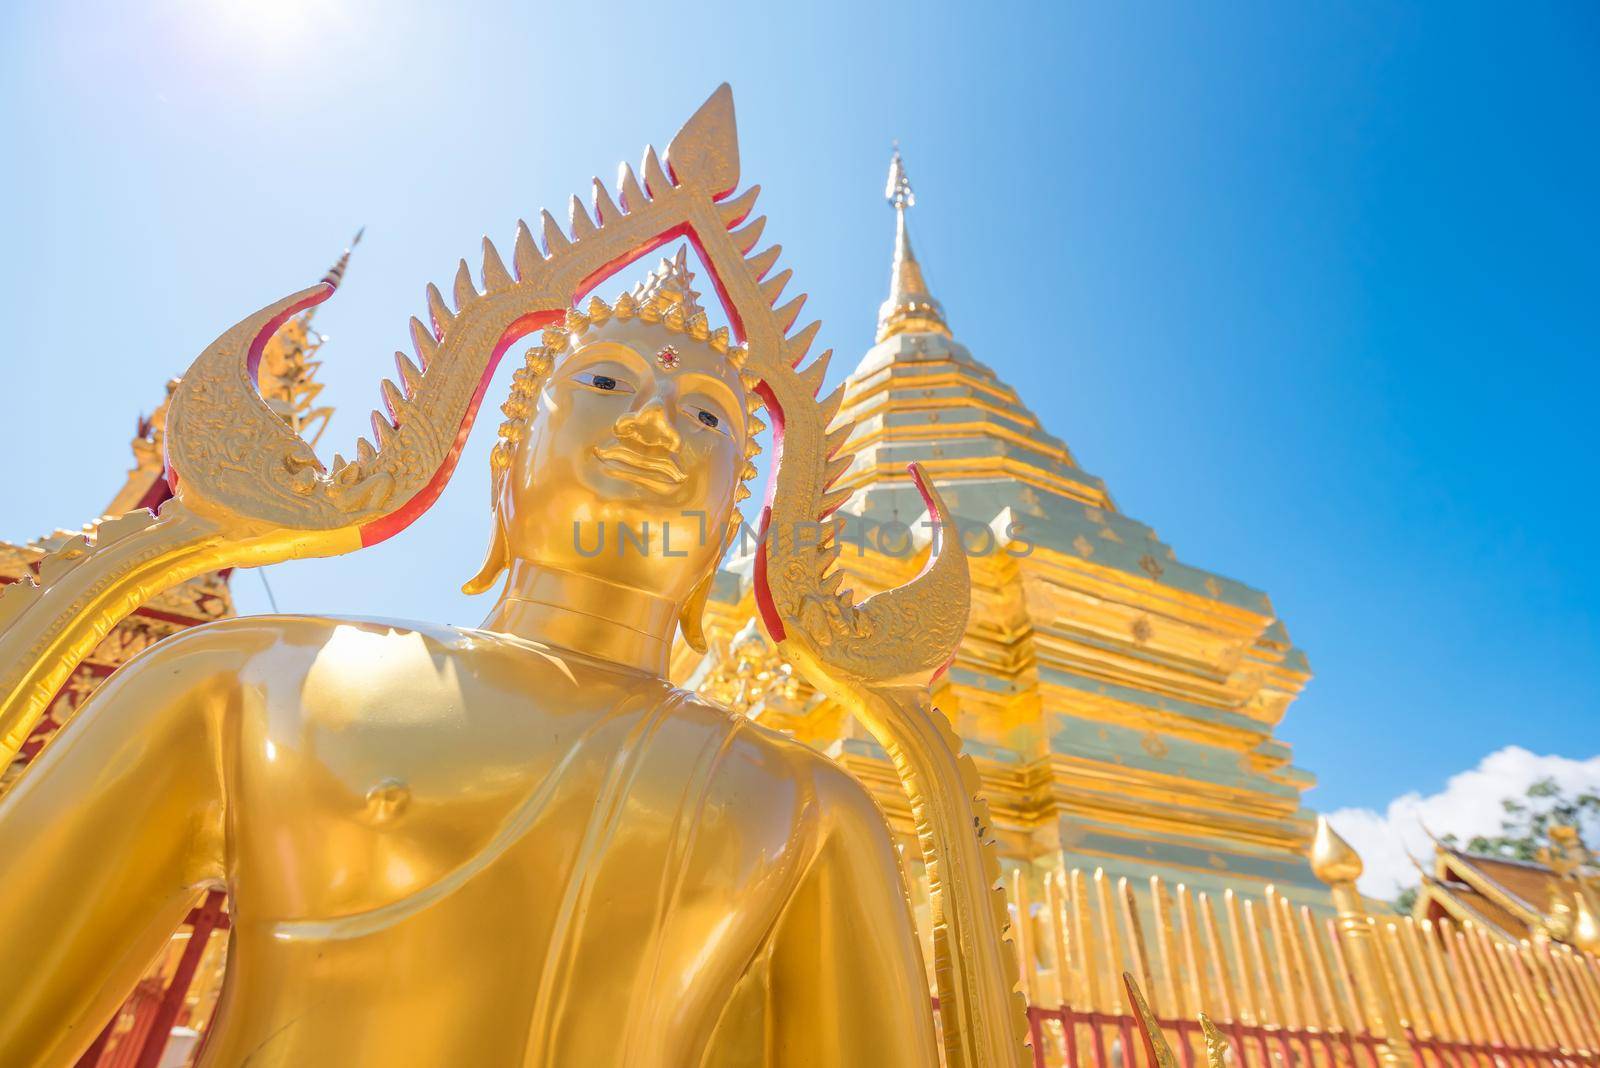 Buddha statue at Wat Phra That Doi Suthep with blue sky in Chiang Mai. The attractive sightseeing place for tourists and landmark of Chiang Mai,Thailand.